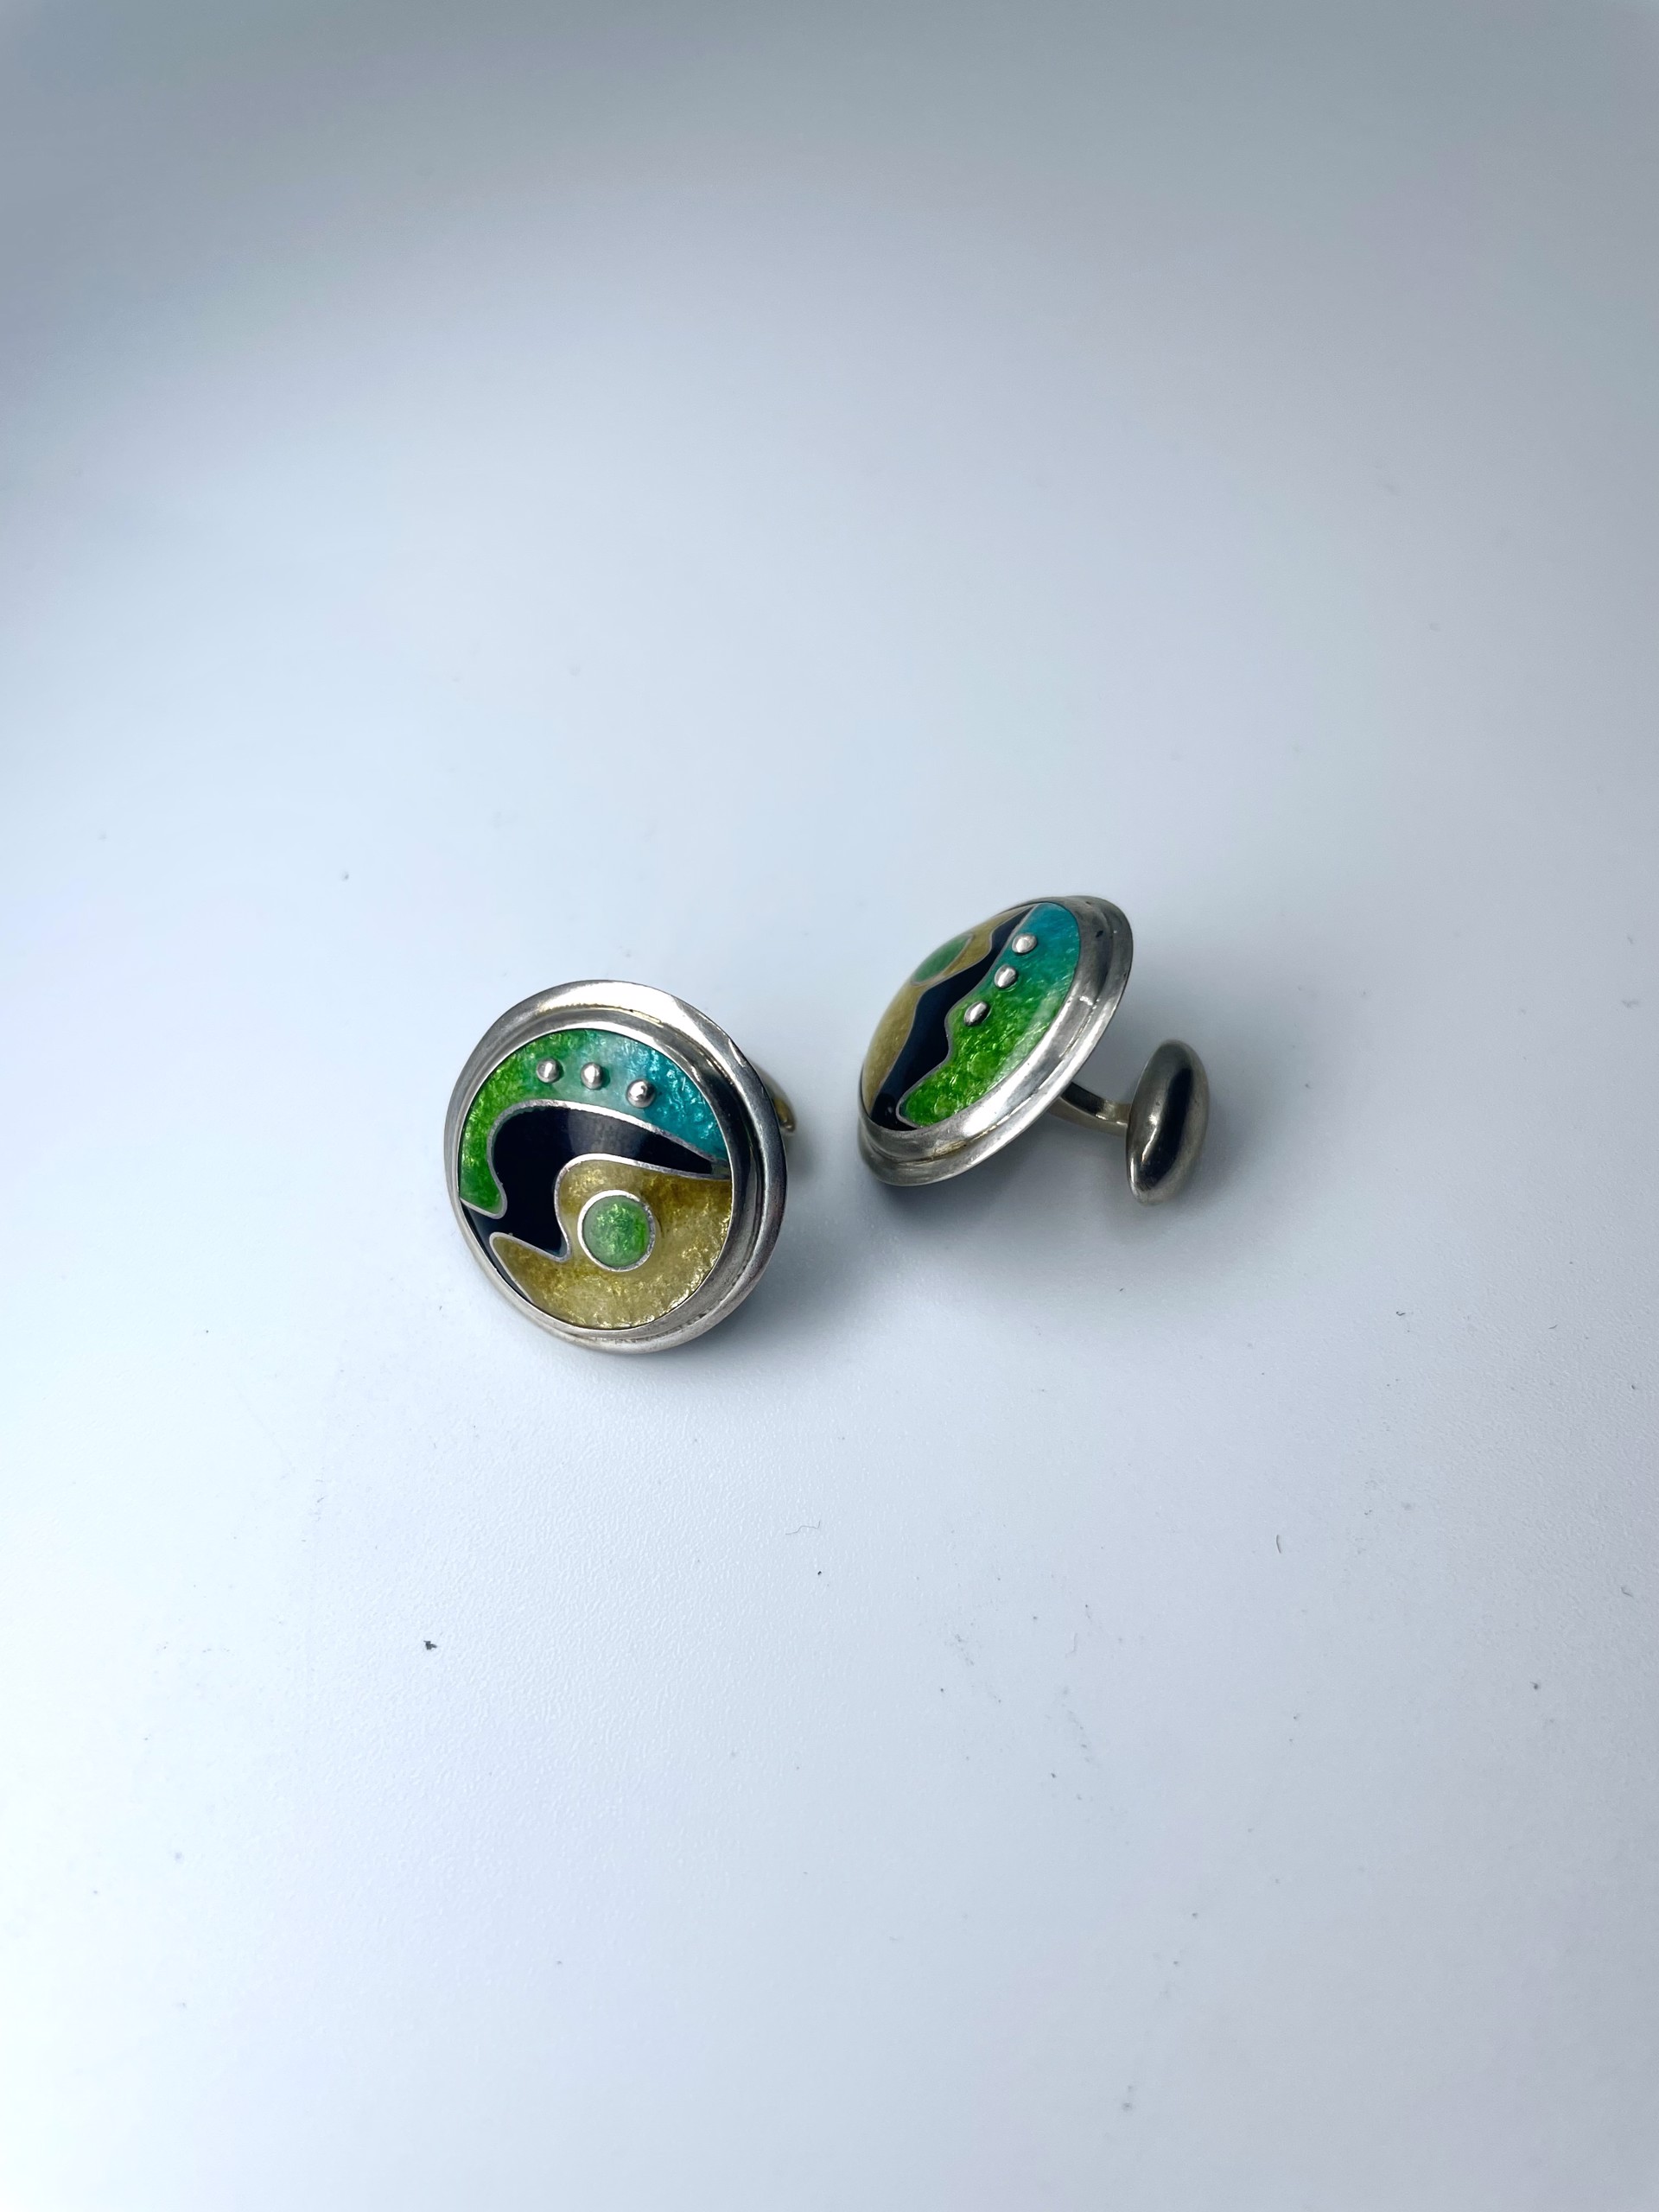 1209 Green and Yellow Cufflinks by Lanni